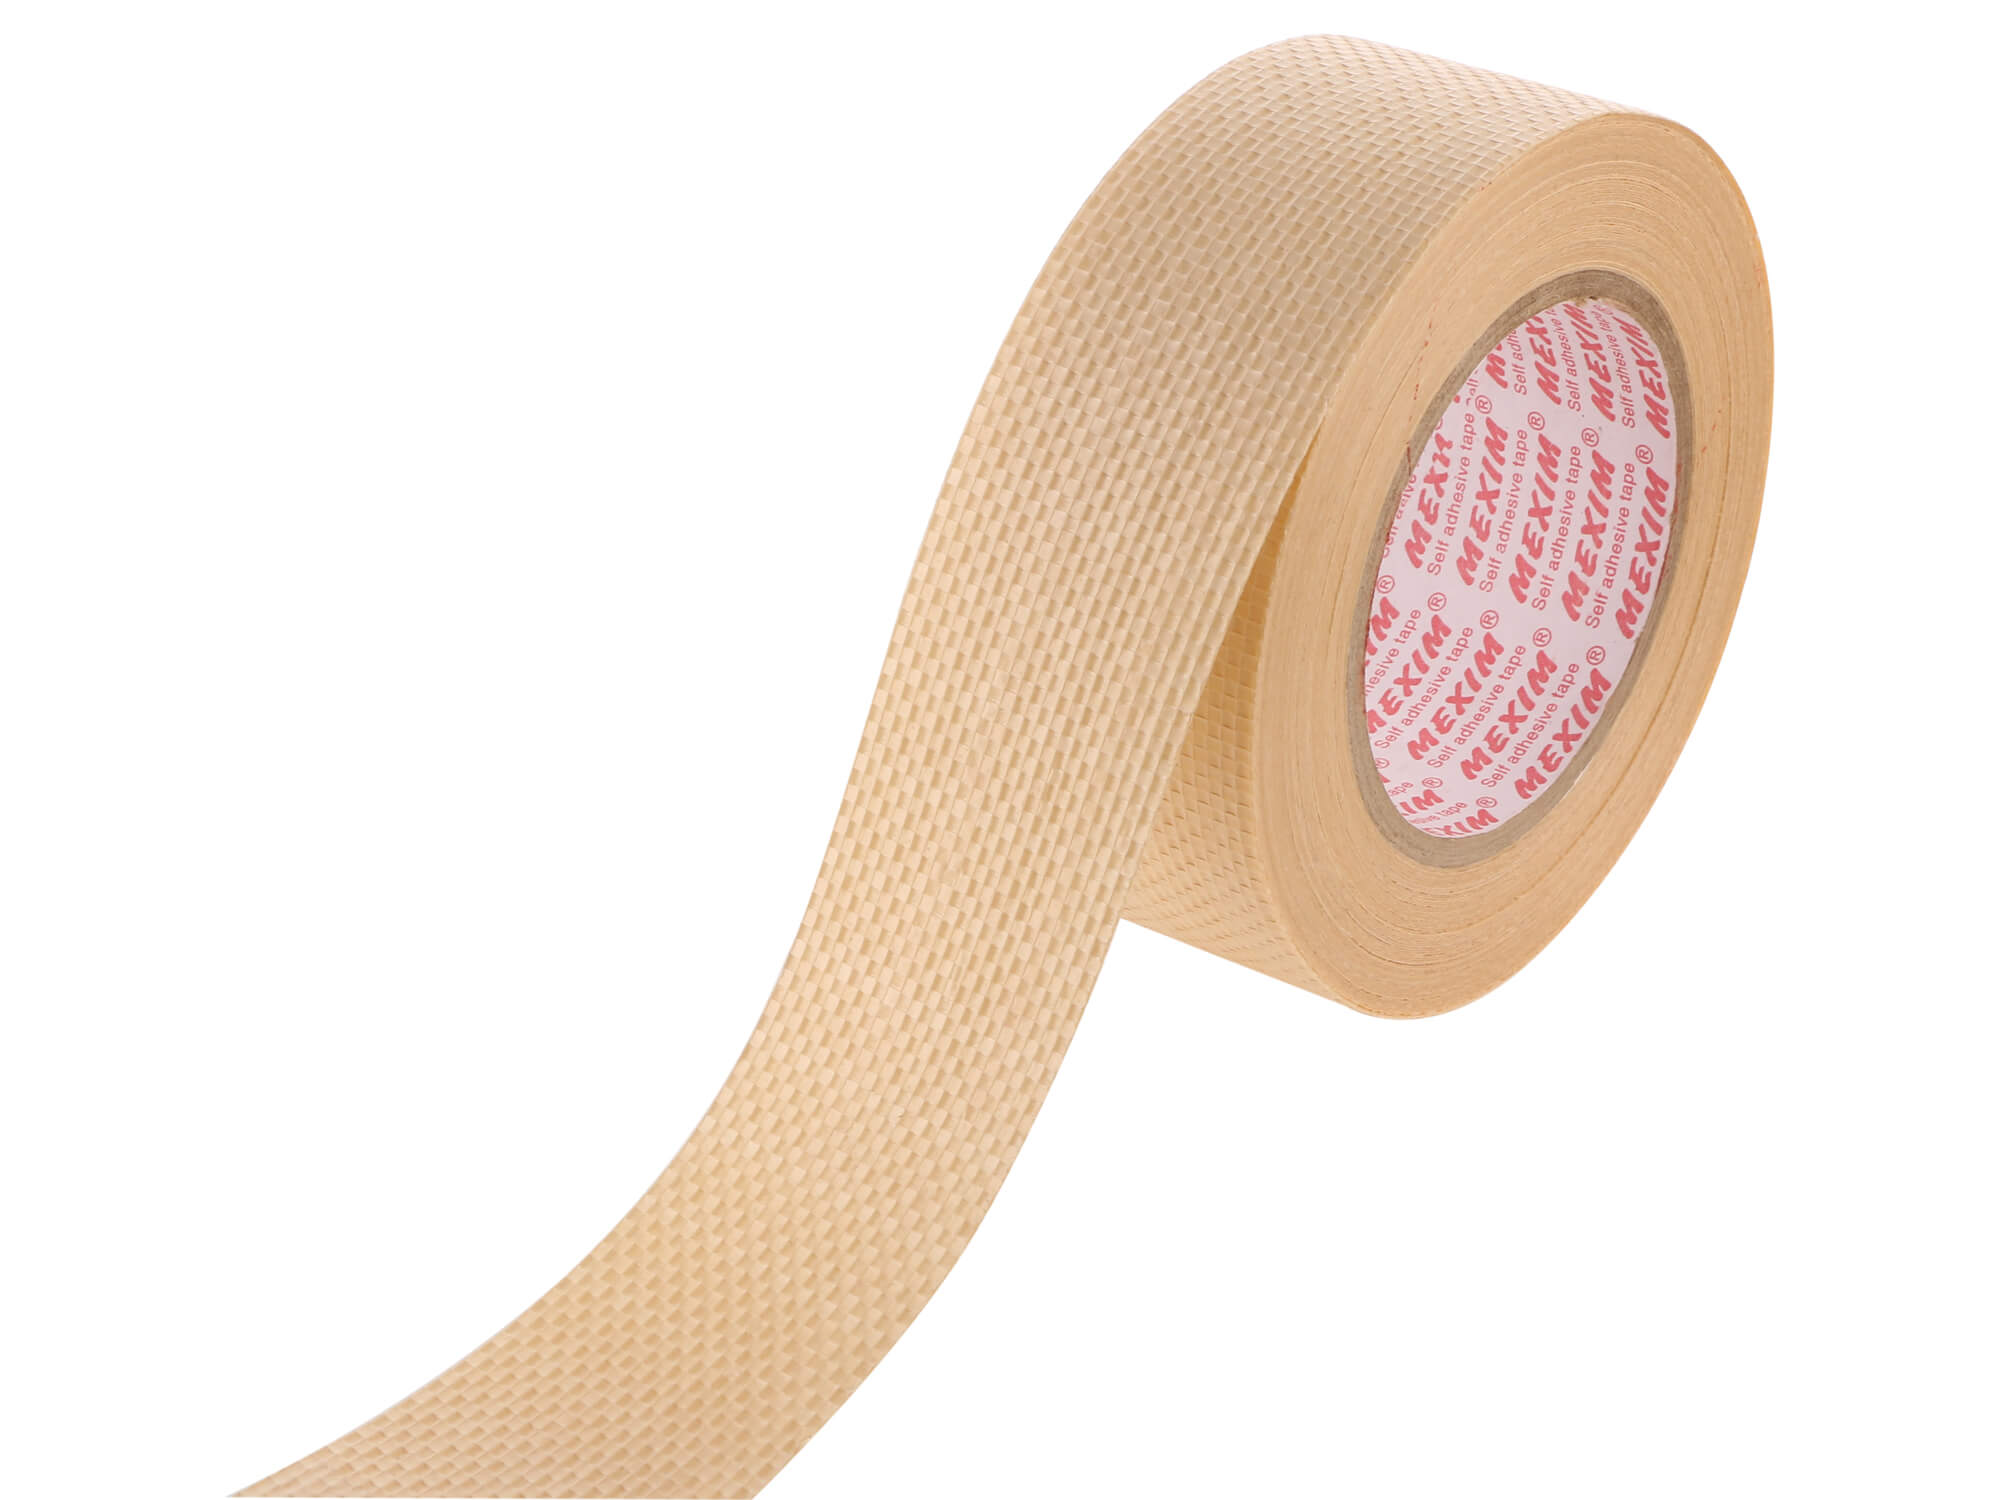 Woven HDPE Fabric Tapes  Mexim Adhesive Tapes Pvt. Ltd.